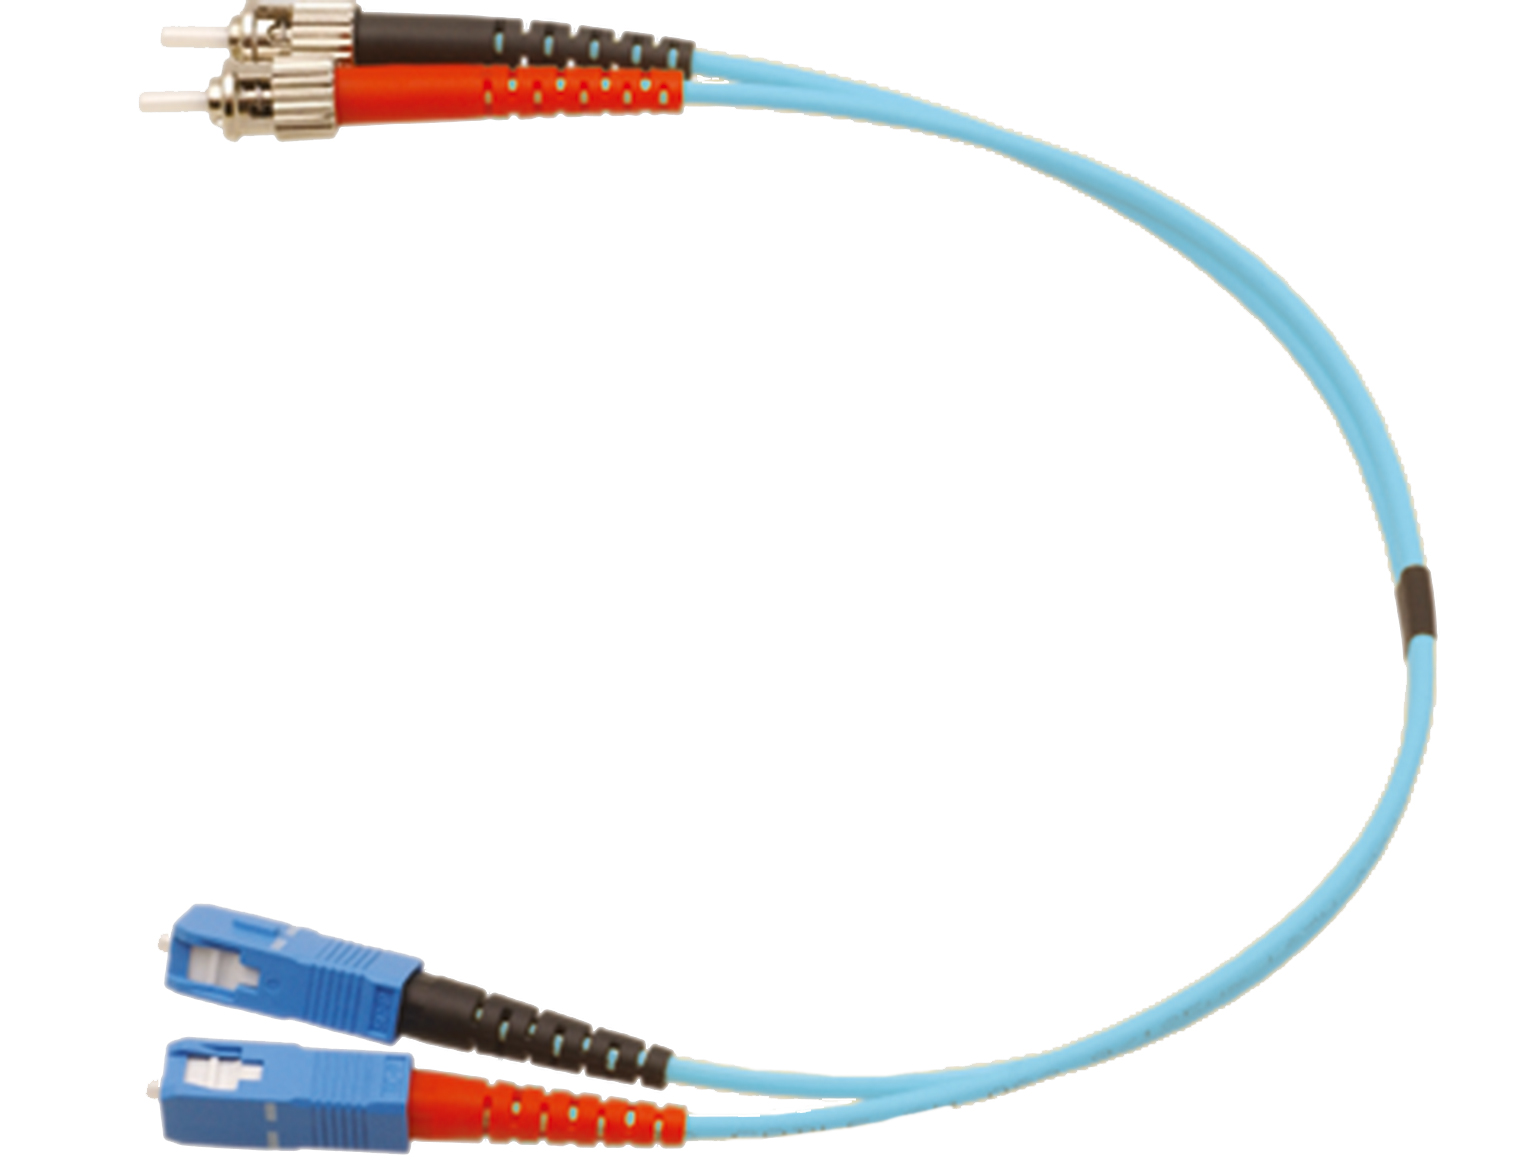 HELUCOM® CONNECTING SYSTEMS® Jumper cable I-VH 2x1 SC/ST